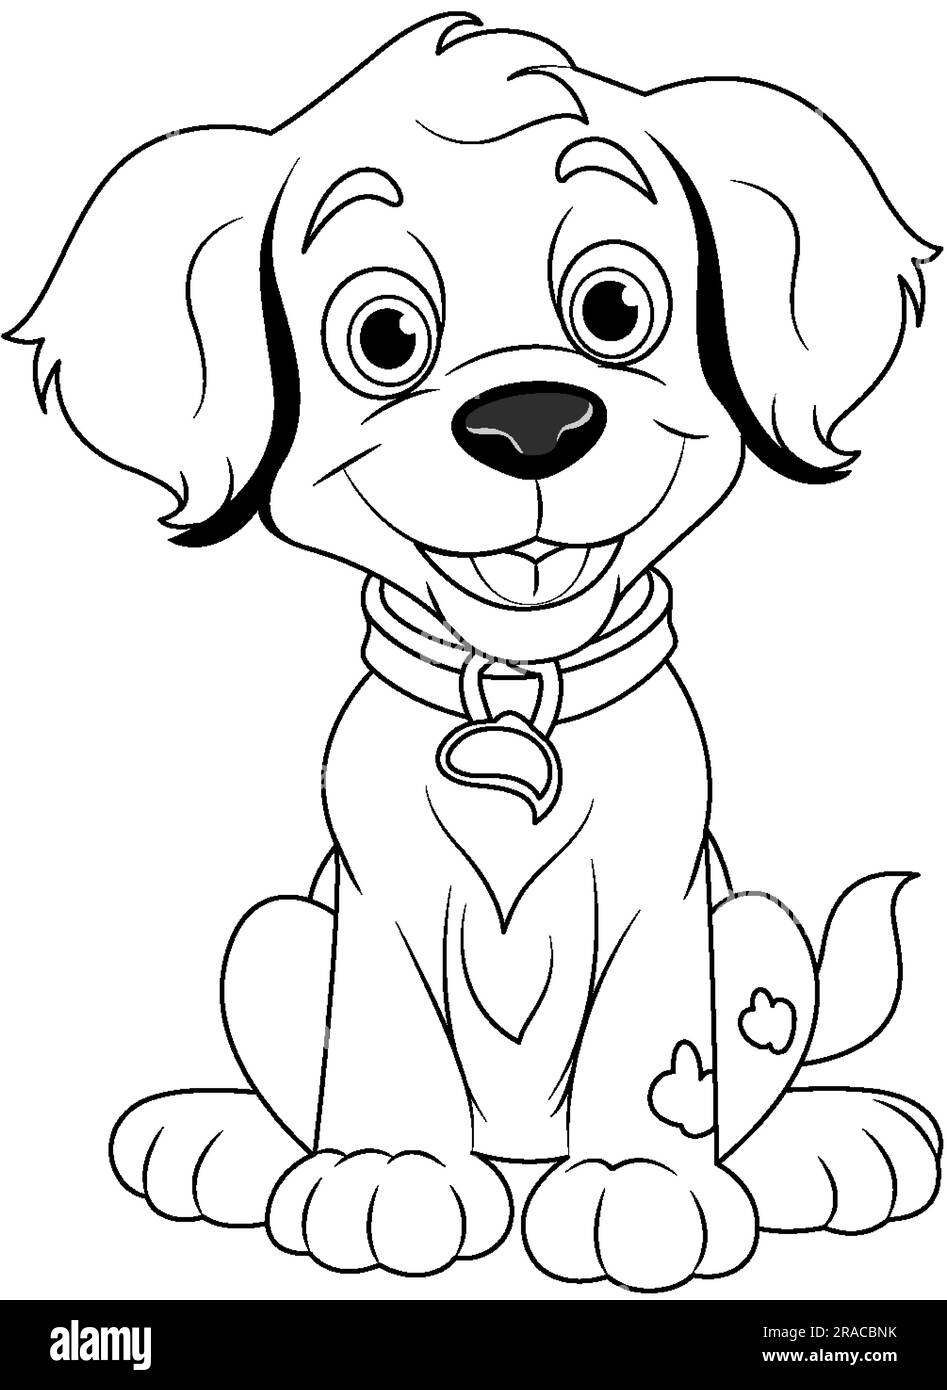 Coloring Page Outline of Cute Dog illustration Stock Vector Image & Art ...